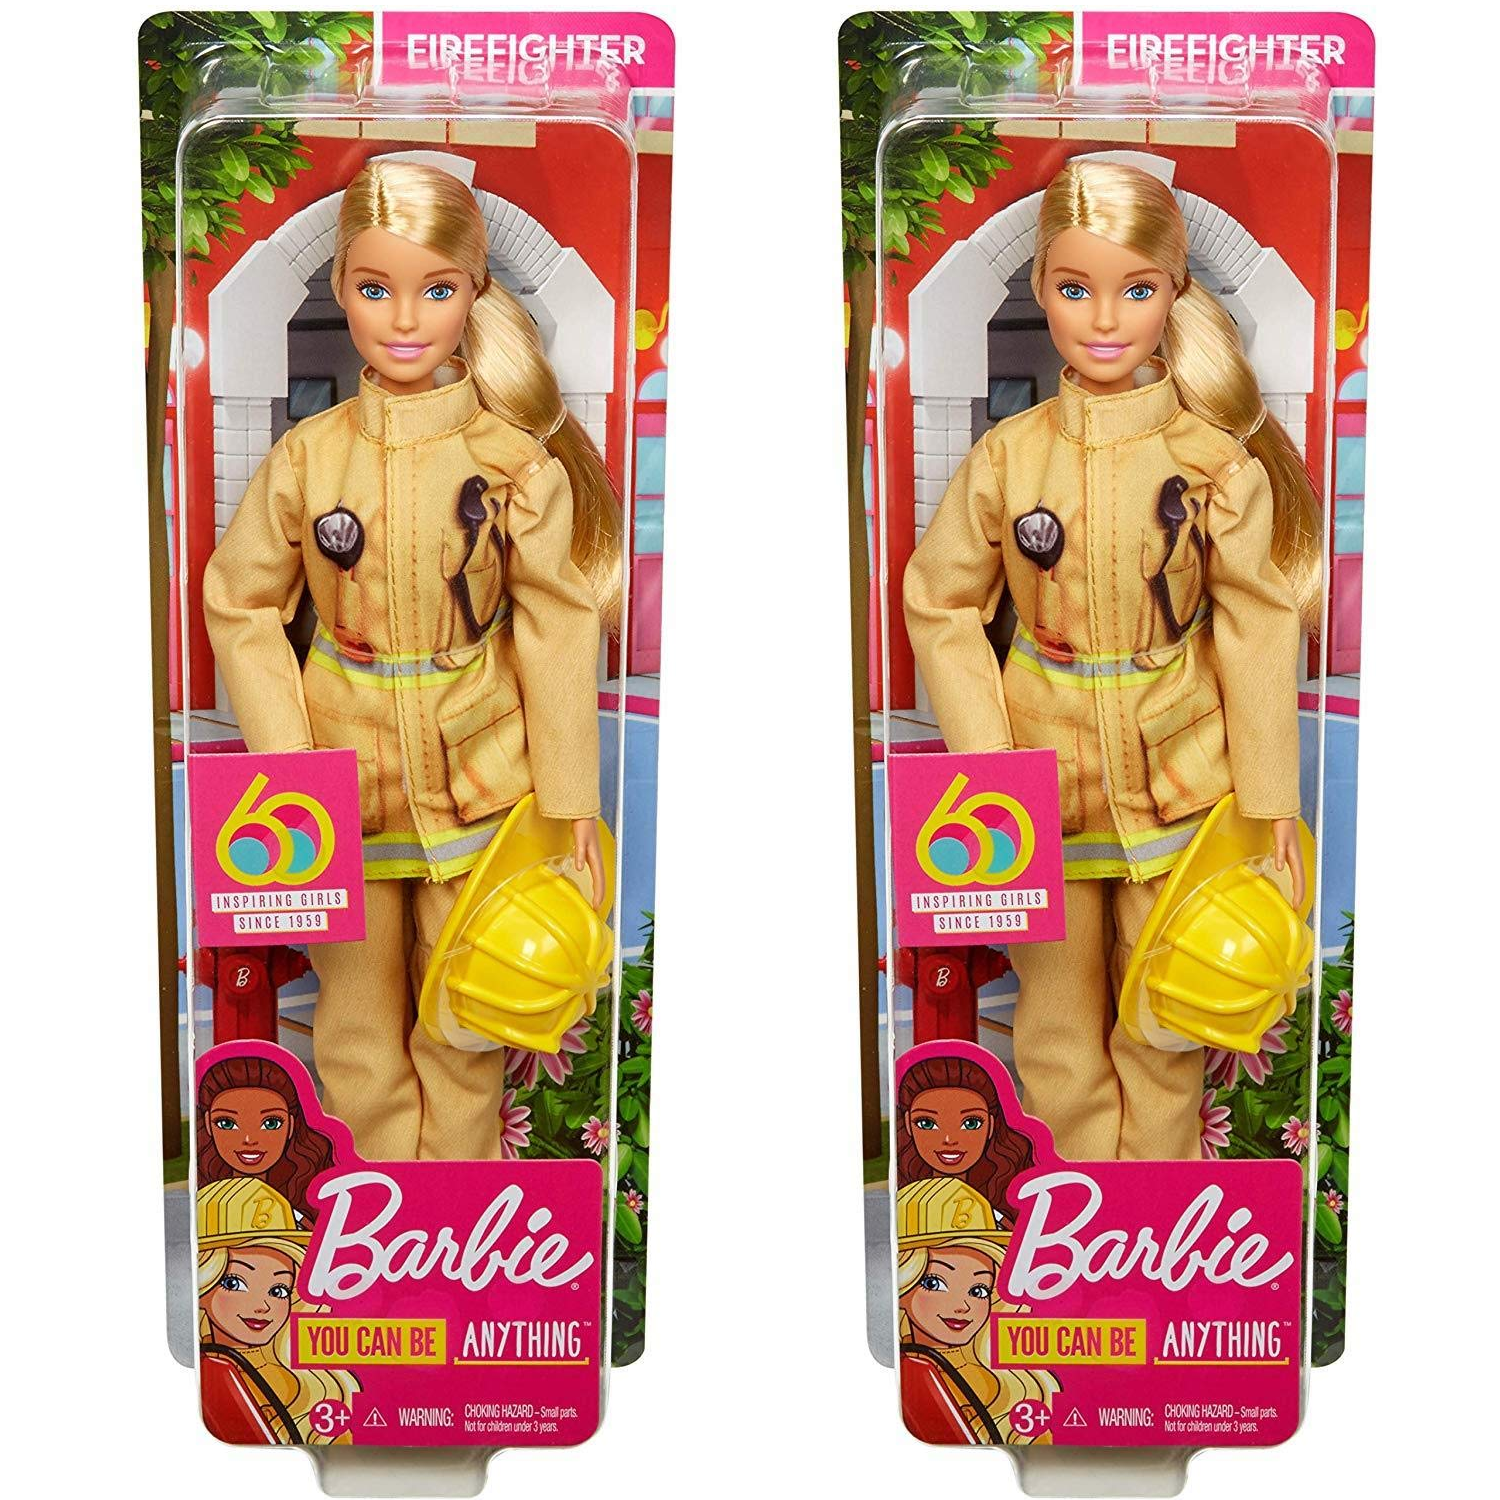 Barbie Careers 60th Anniversary Firefighter Doll Only $7.99!